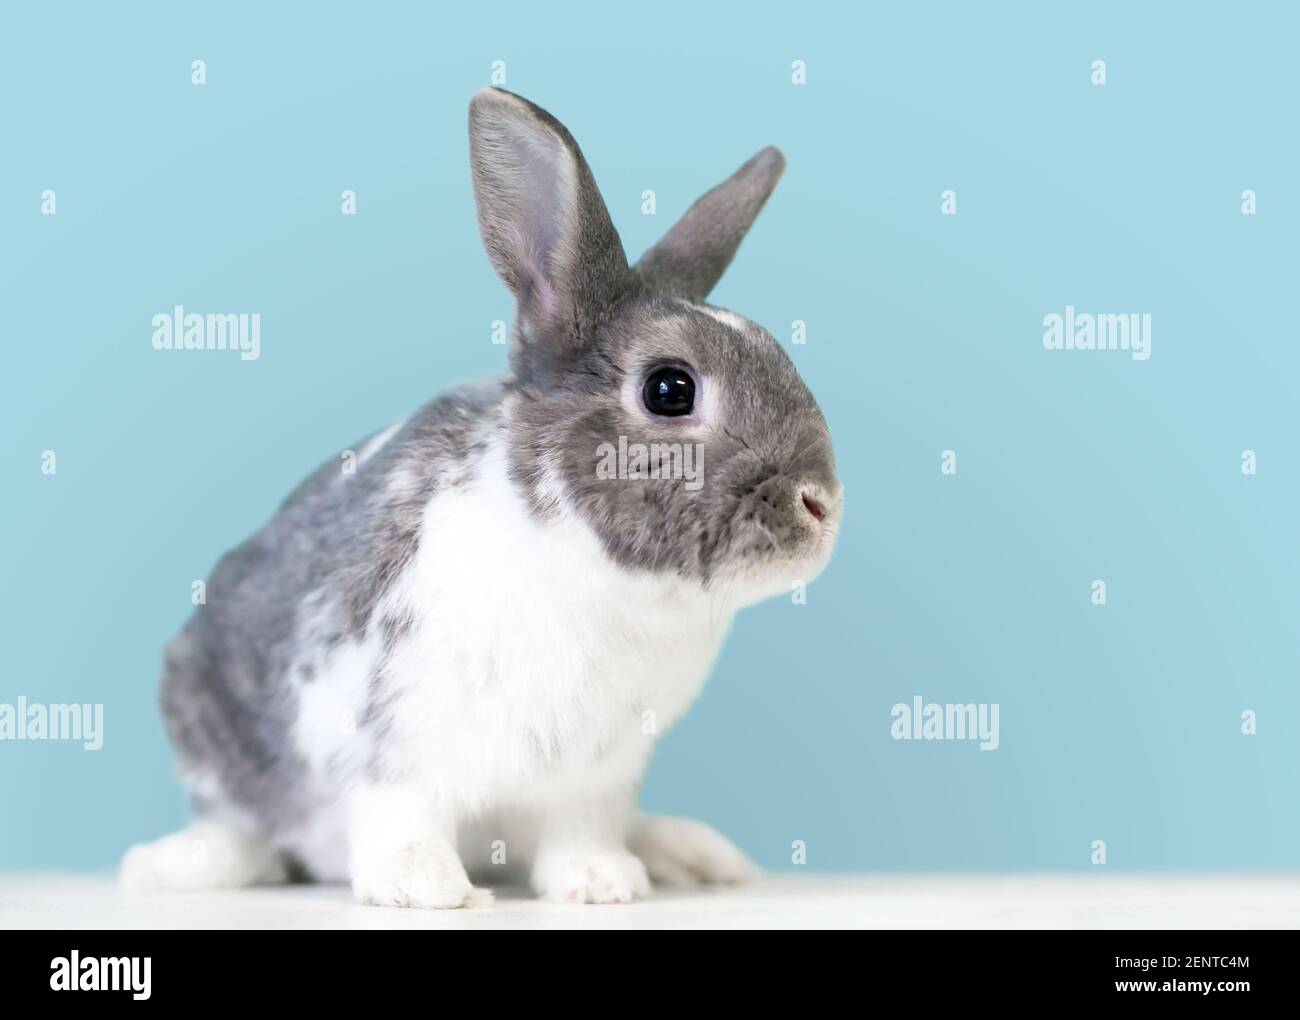 A cute gray and white Dwarf mixed breed pet rabbit in front of a blue background Stock Photo